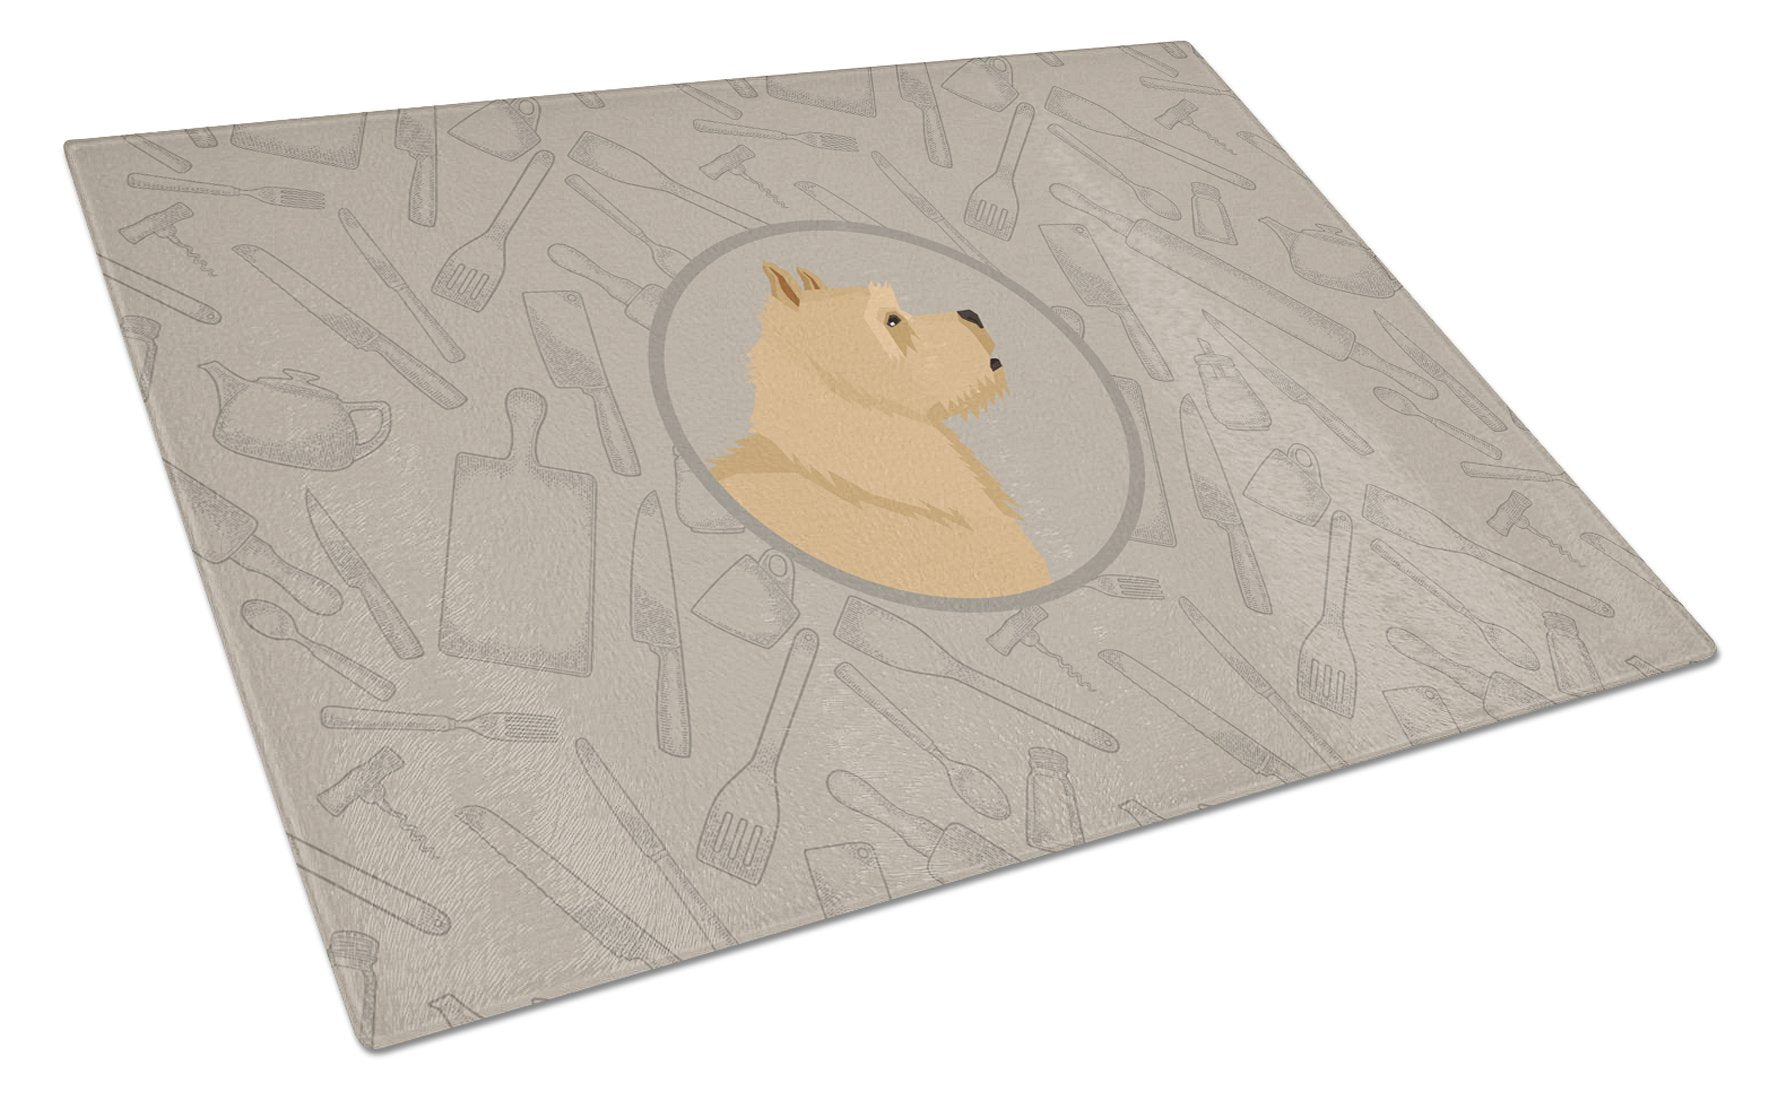 Norwich Terrier In the Kitchen Glass Cutting Board Large CK2198LCB by Caroline's Treasures